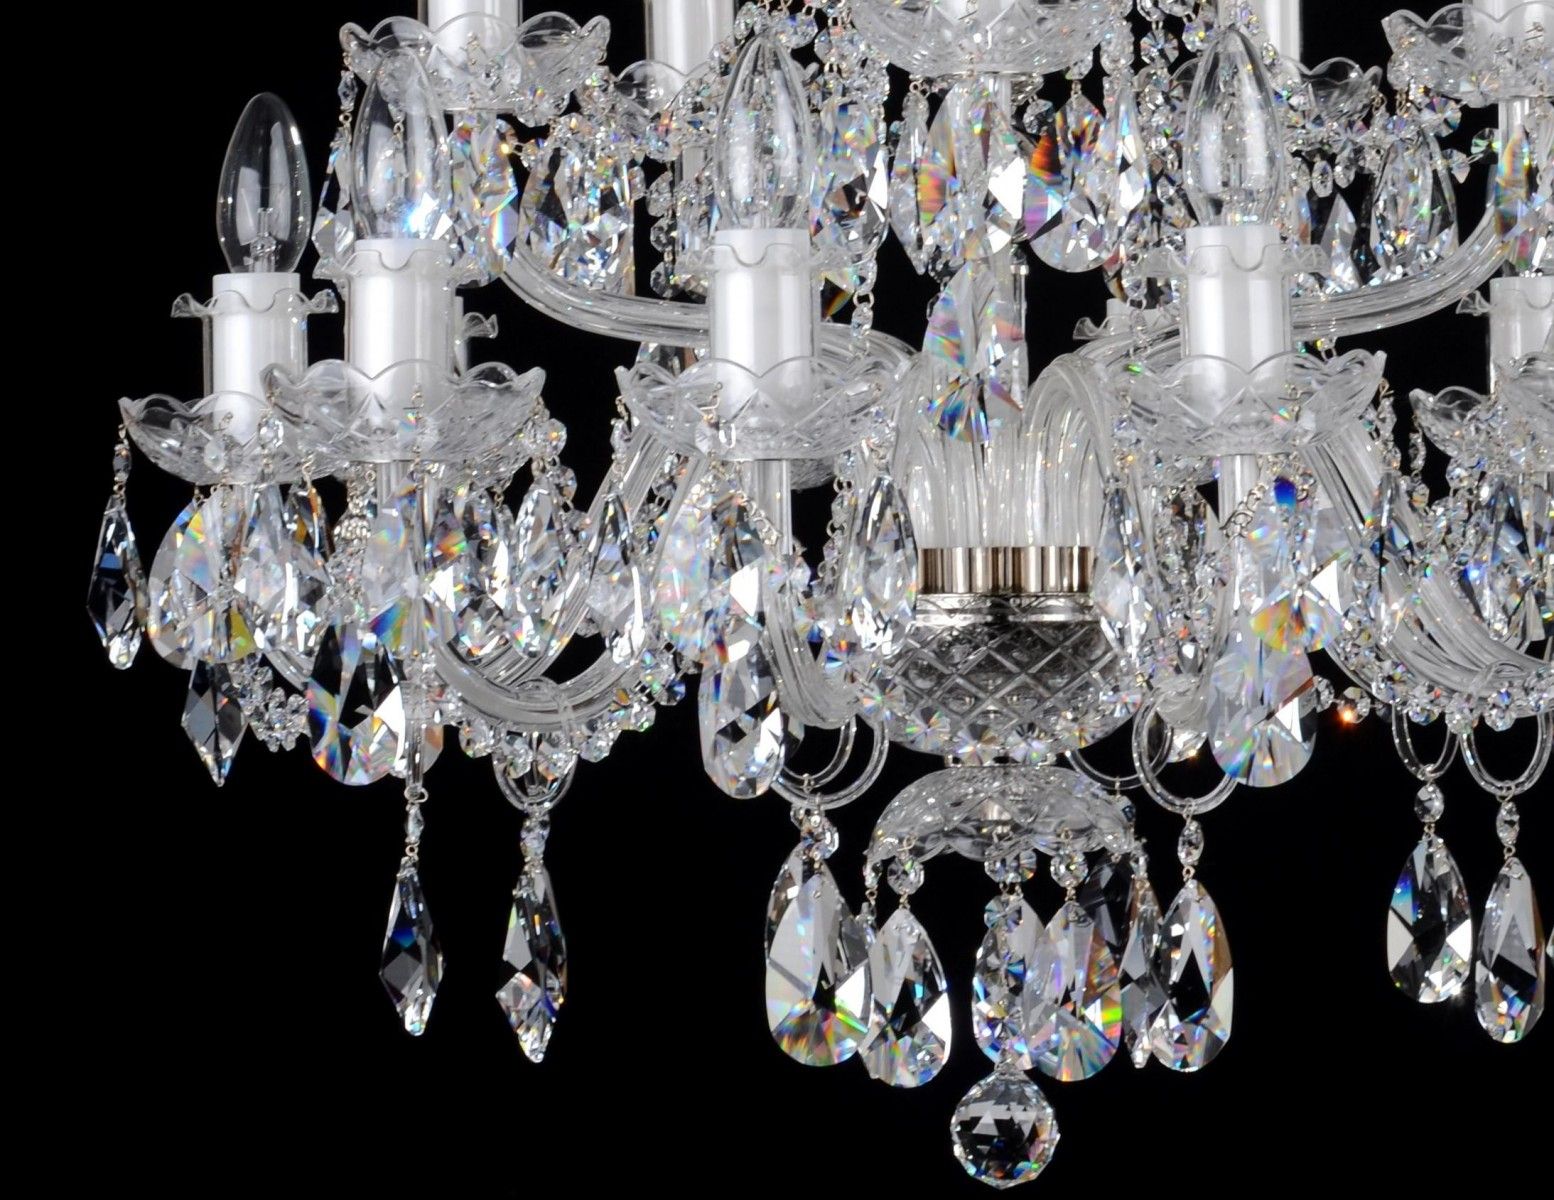 15 Arms Silver Crystal Chandelier With Swarovski Crystal Within Soft Silver Crystal Chandeliers (View 8 of 15)